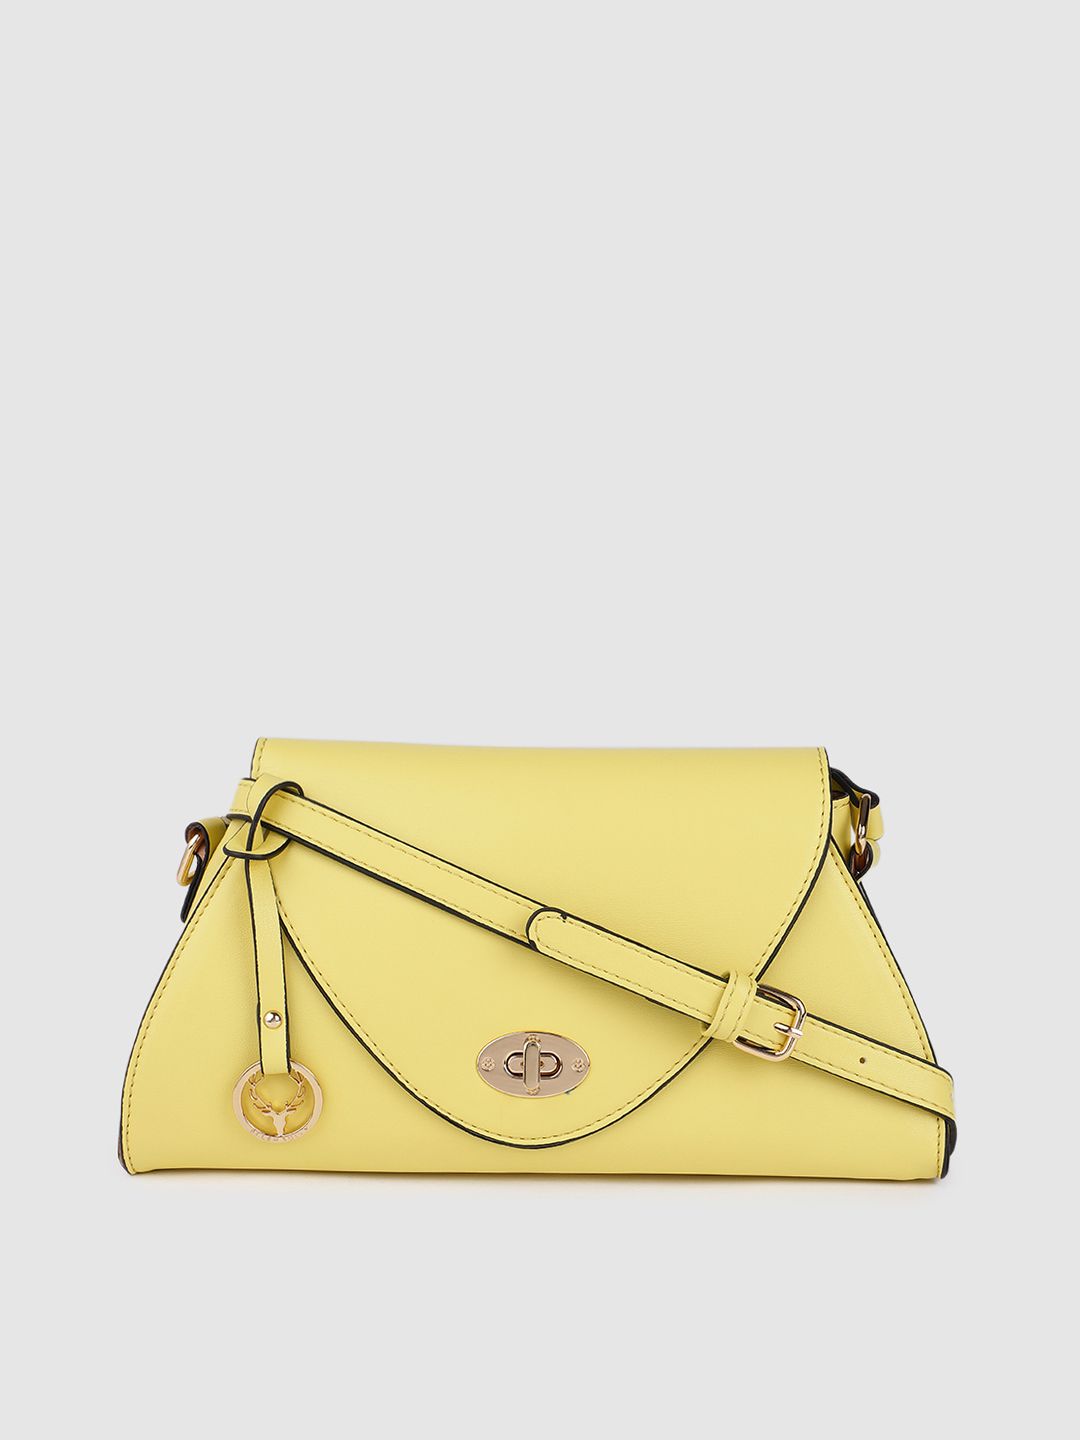 Allen Solly Women Yellow PU Structured Sling Bag Price in India